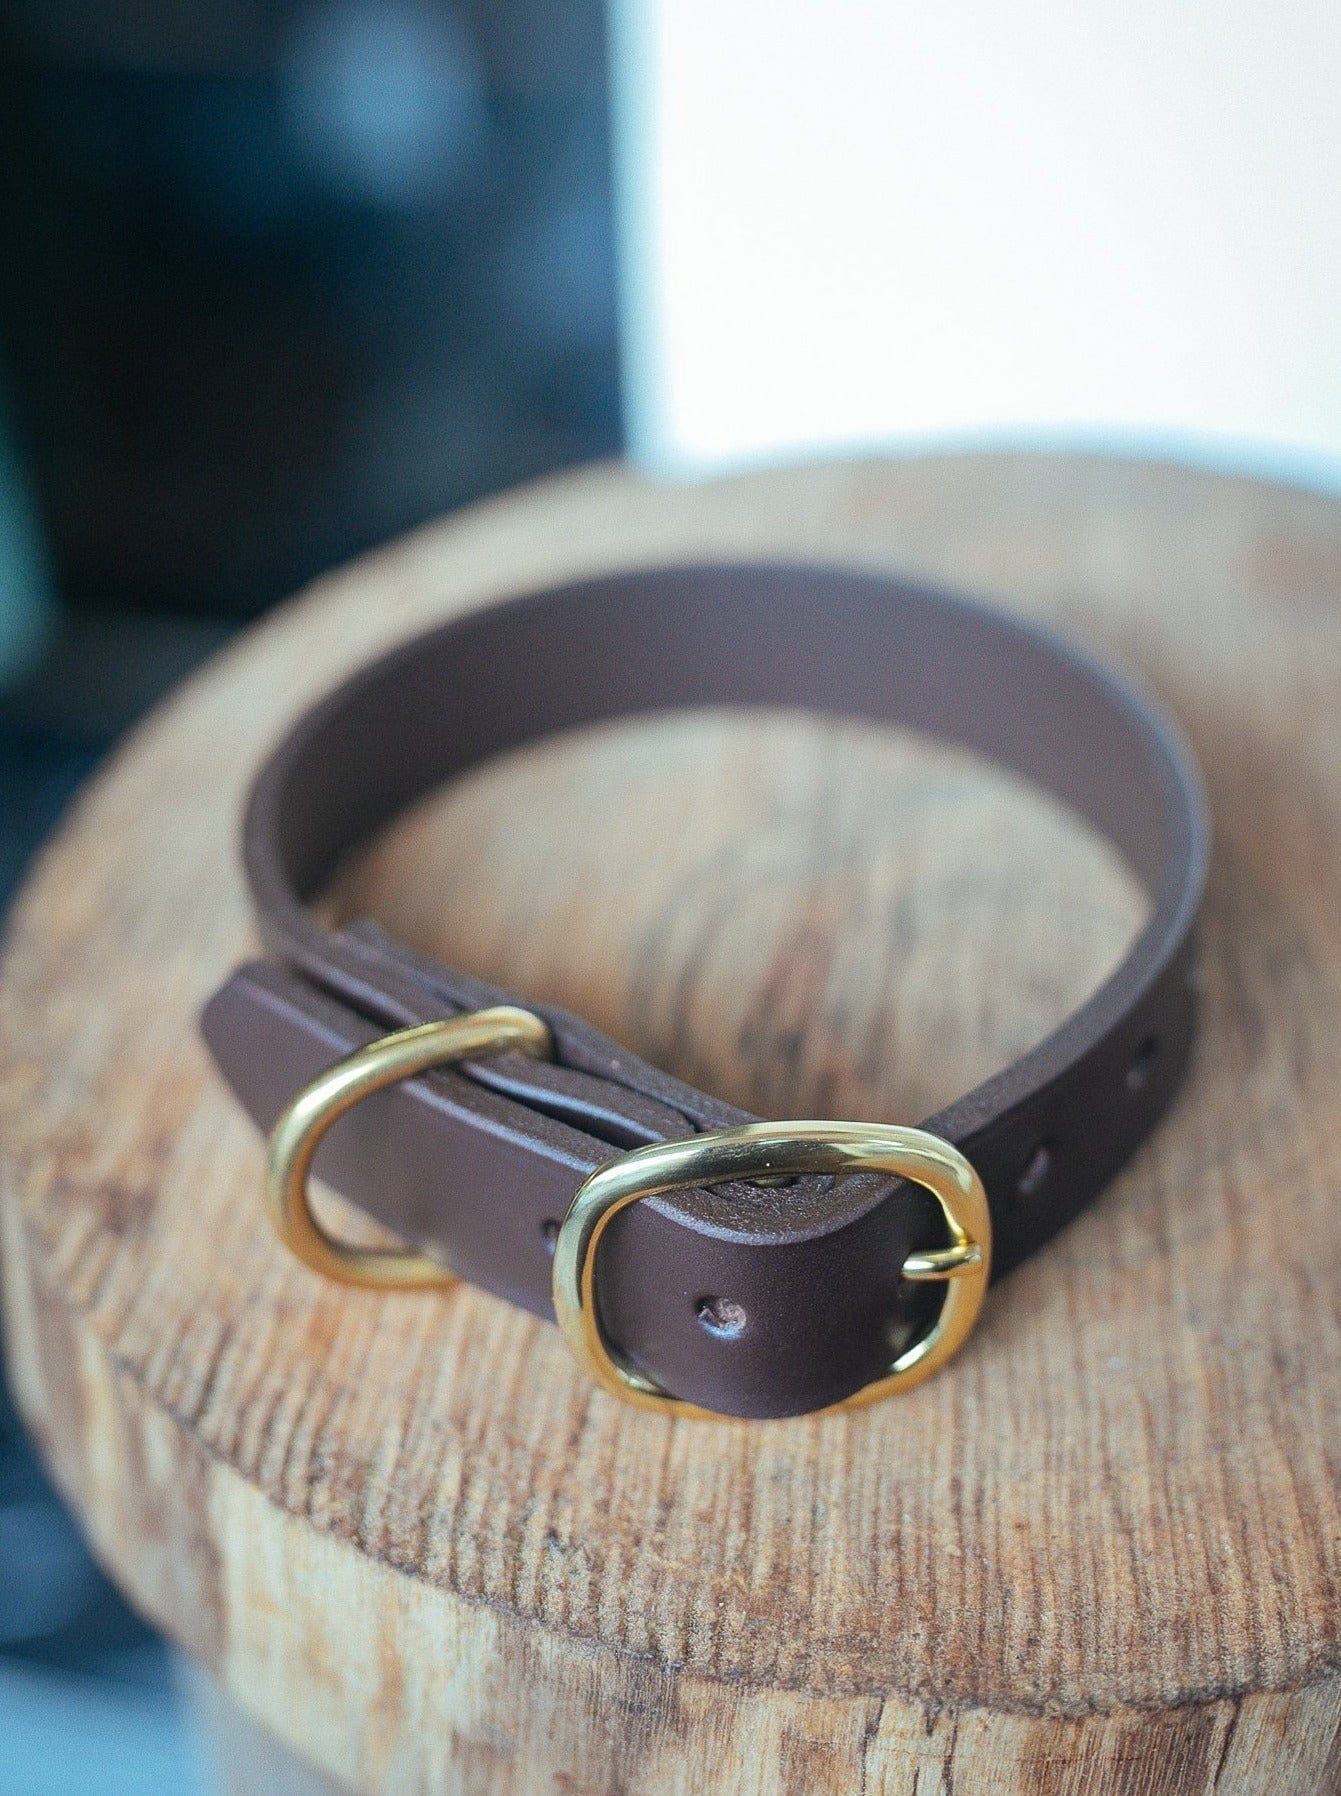 The Real McCaul Leathergoods Pet Collars & Harnesses Classic Dog Collar - 25mm - Dark Brown Australian Made Australian Owned Australian Made Dog Collar - Solid Leather with Brass